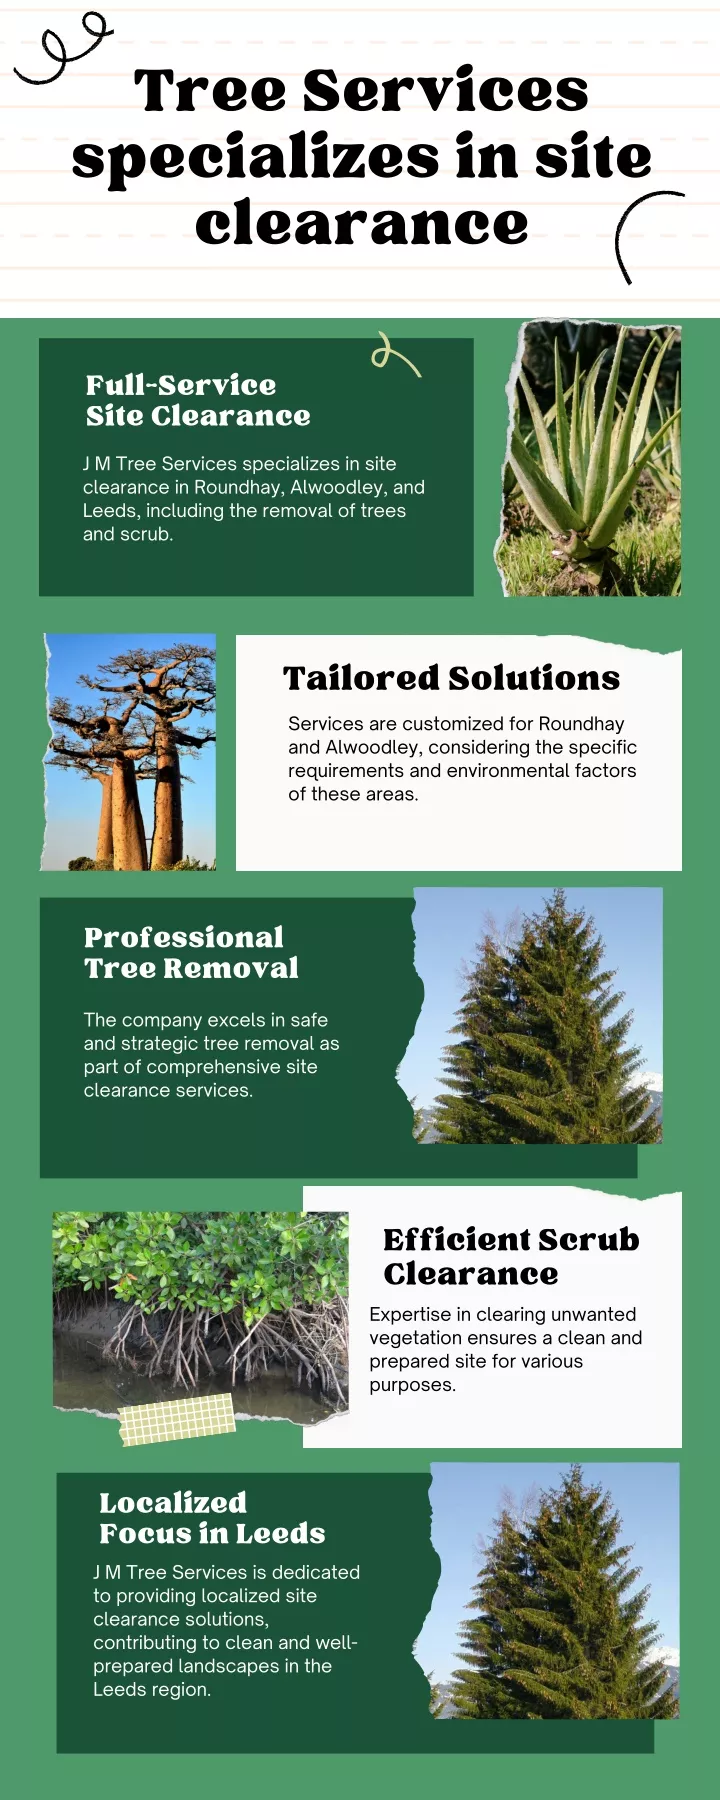 tree services specializes in site clearance